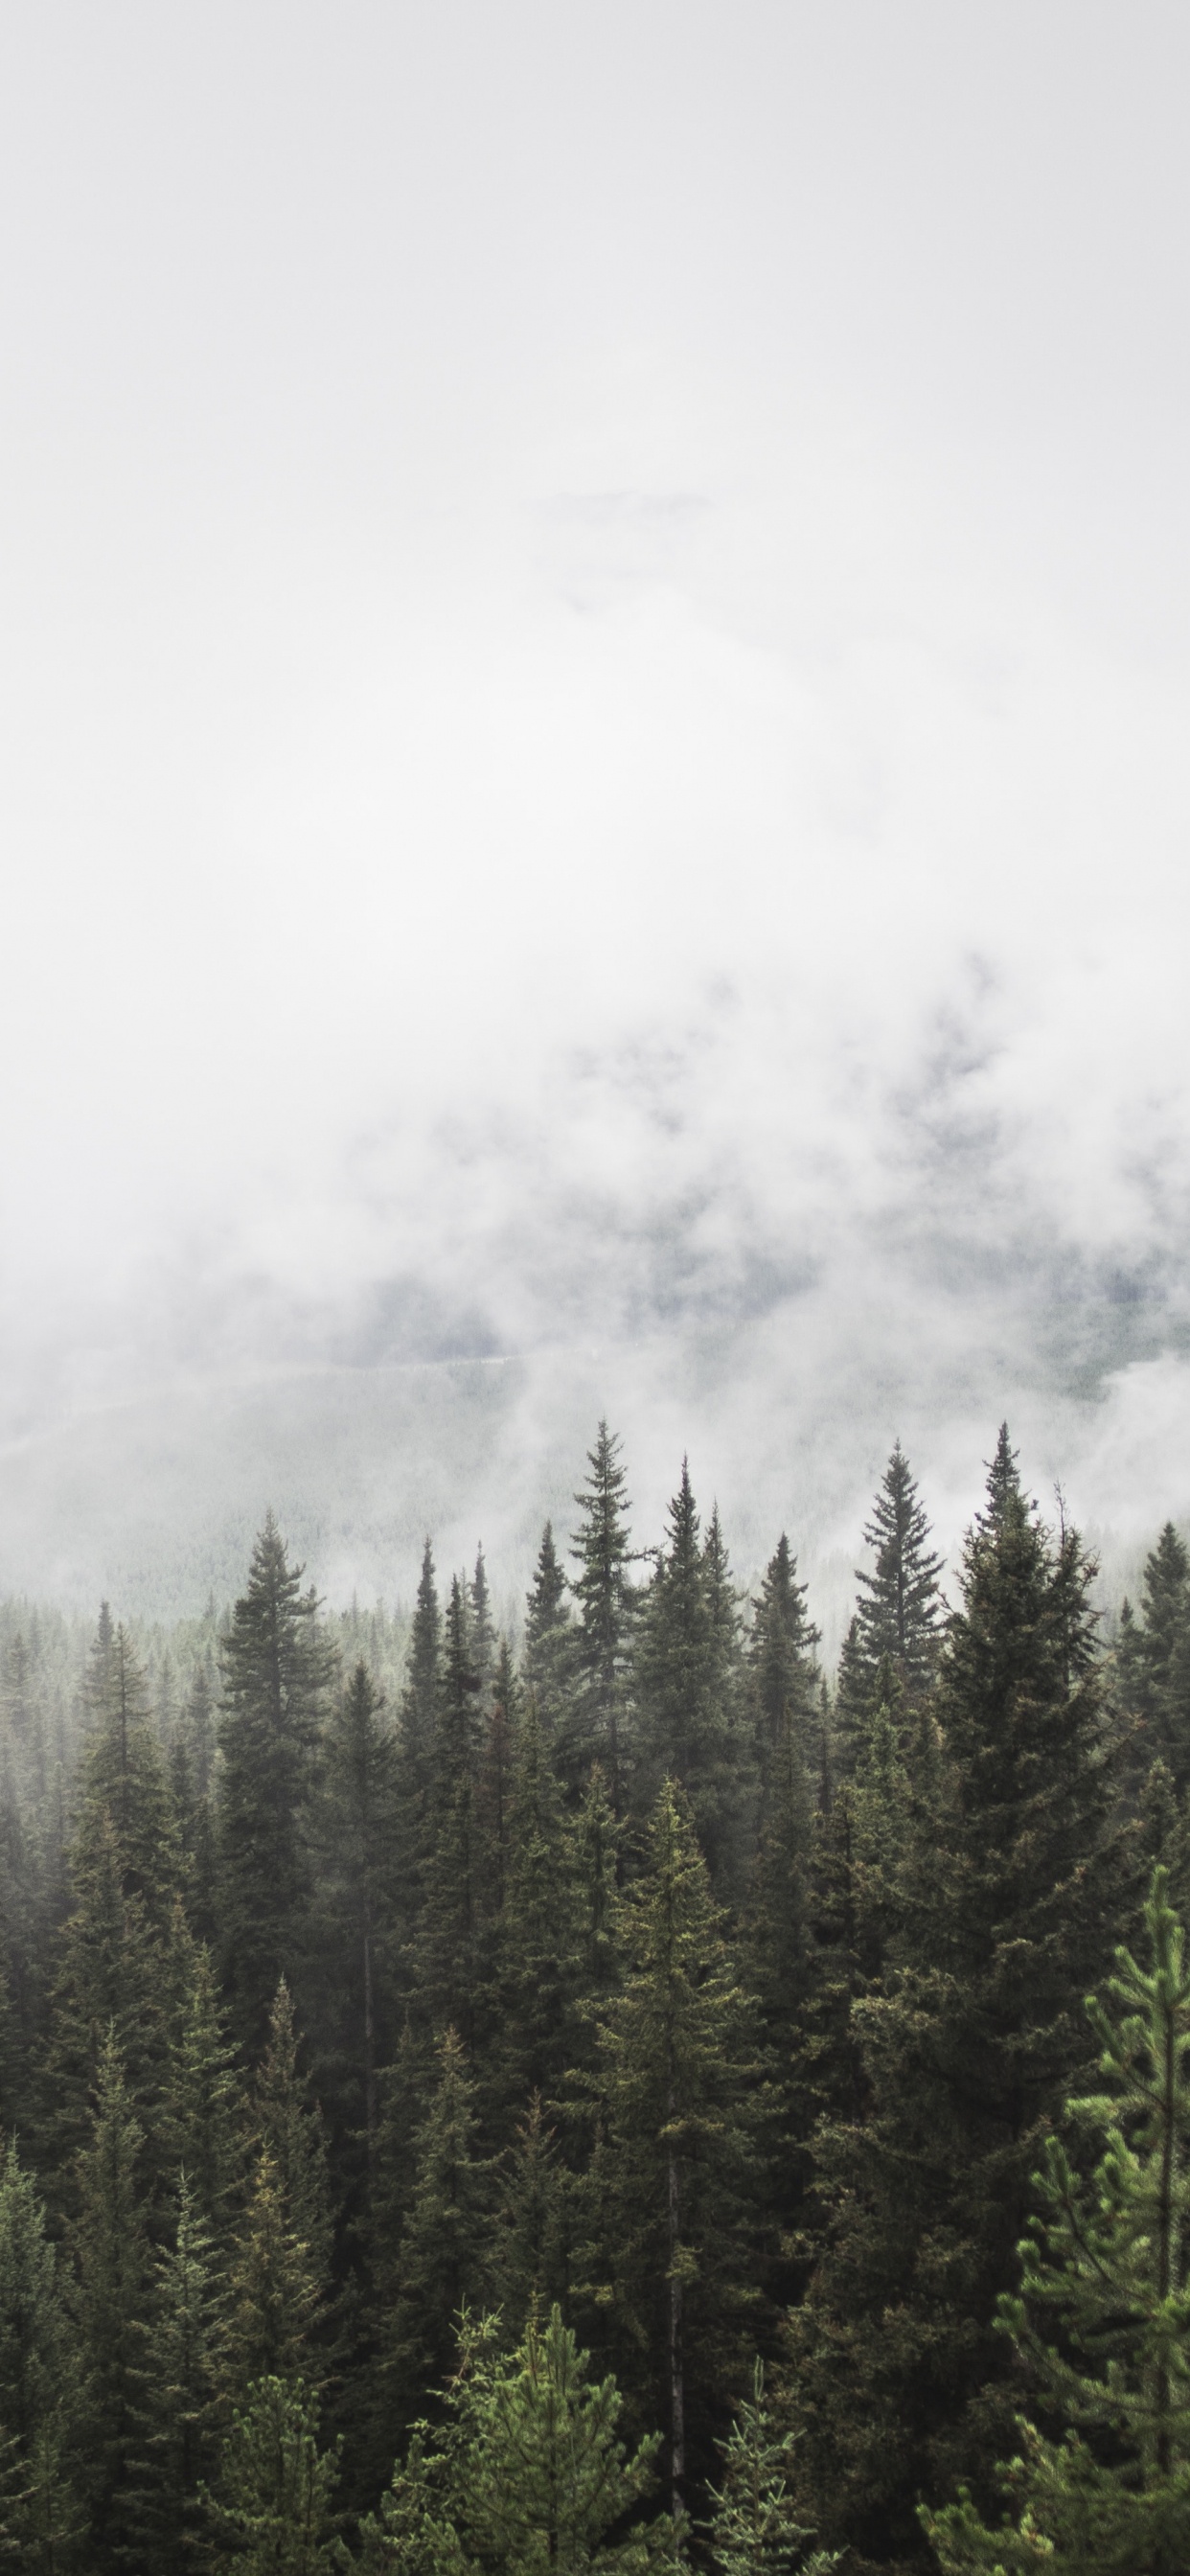 Green Pine Trees Covered With Fog. Wallpaper in 1242x2688 Resolution